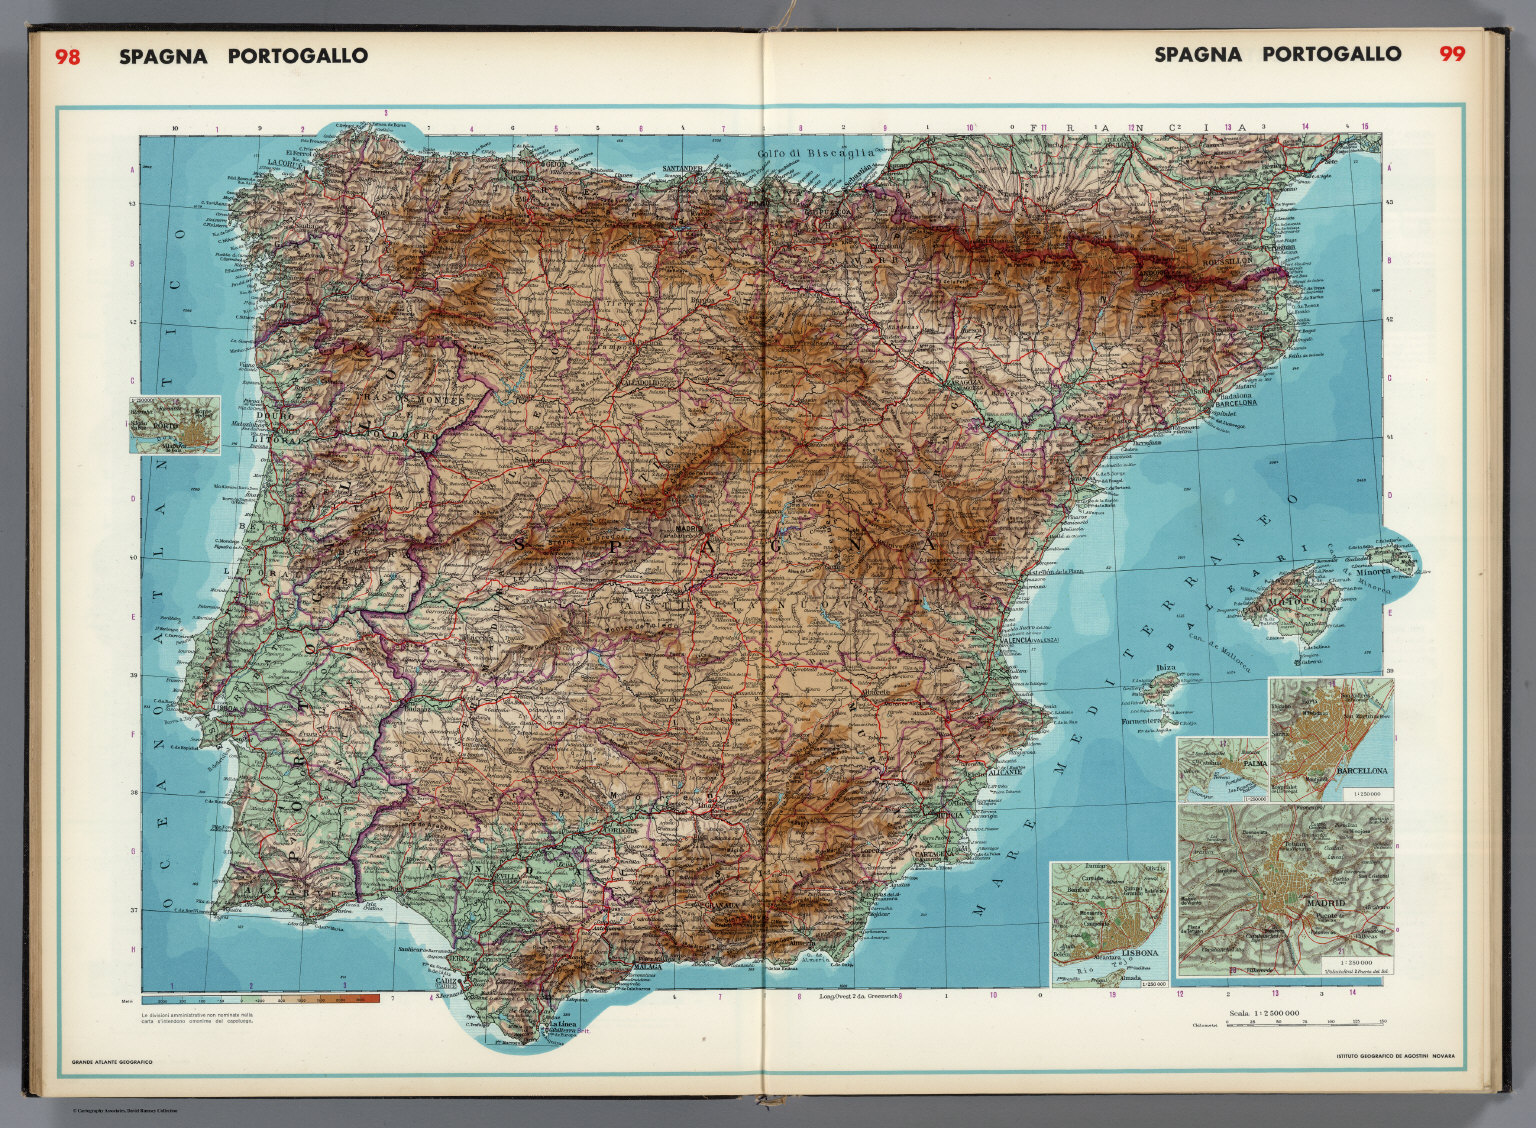 Spagna Portogallo David Rumsey Historical Map Collection